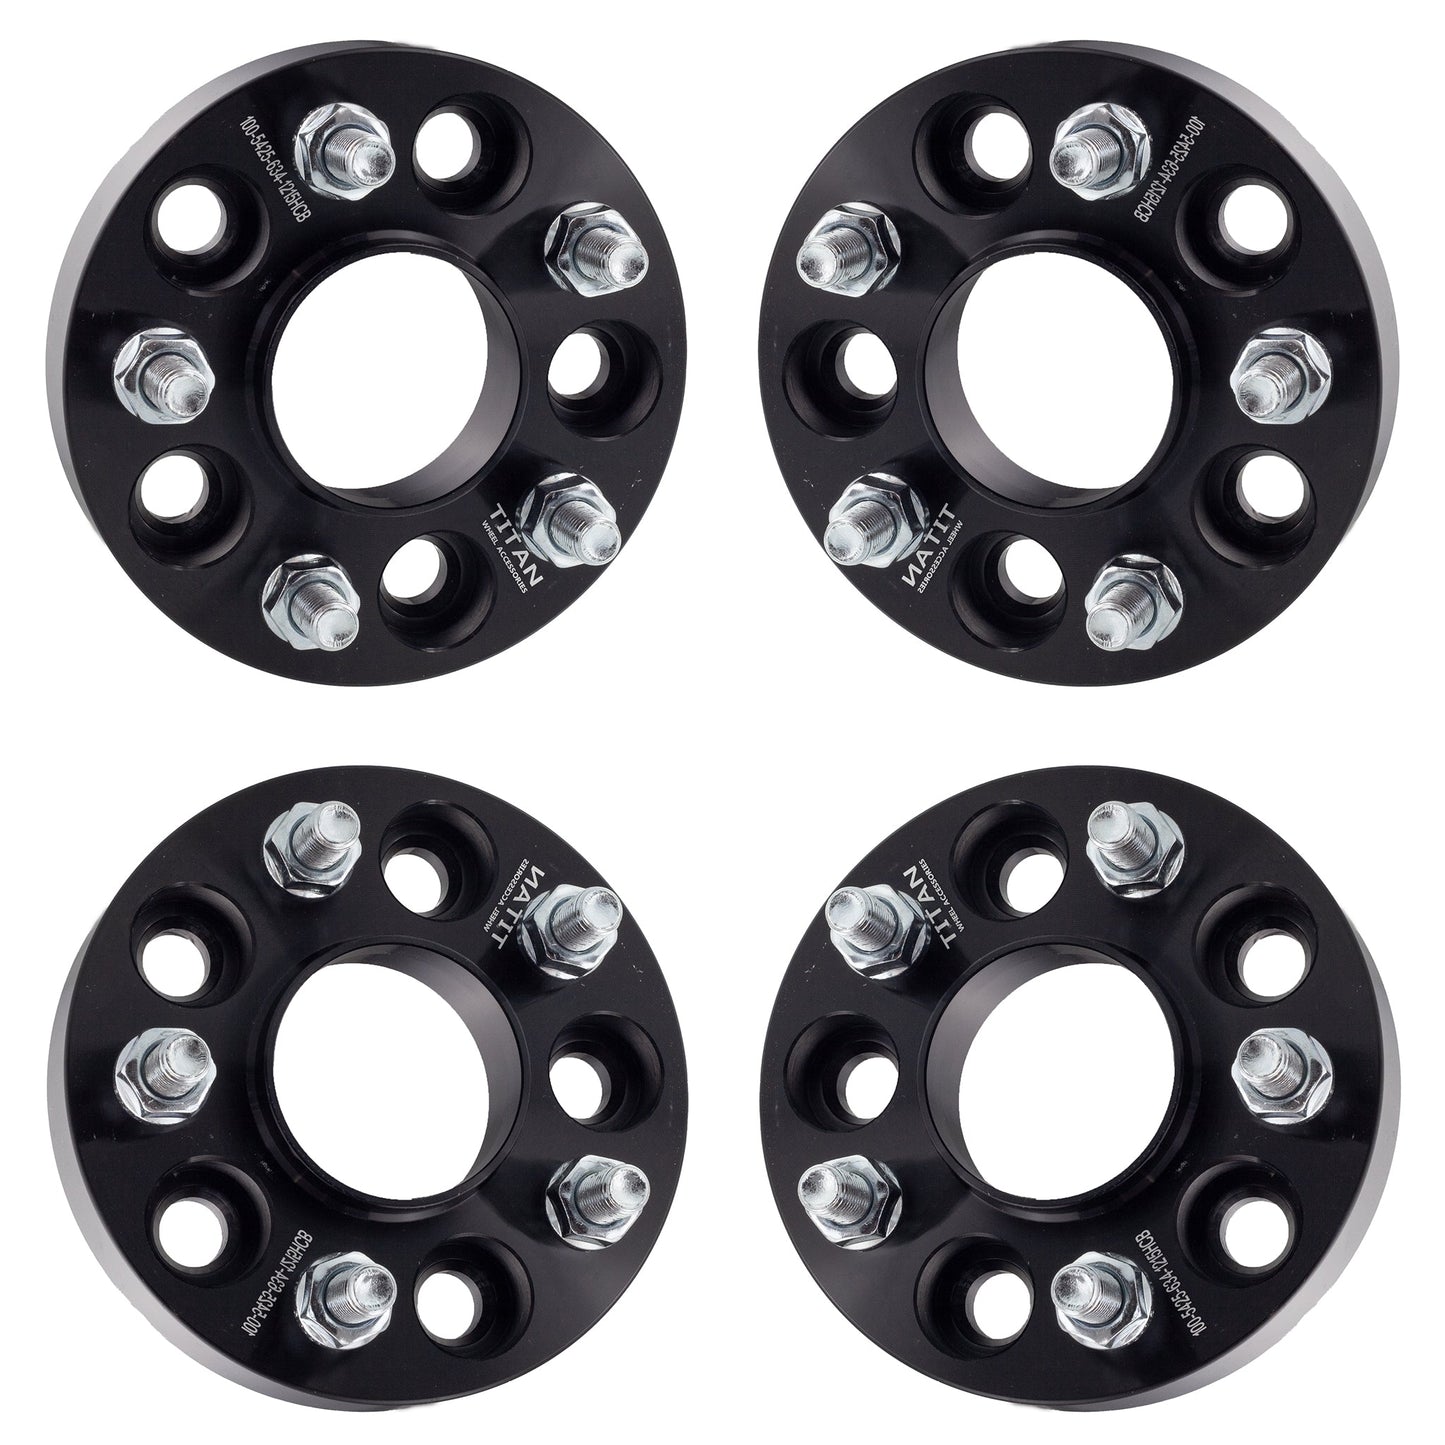 1.25" (32mm) Titan Wheel Spacers for Ford Bronco Sport Escape | 5x4.25 (5x108) | 63.4 Hubcentric | 12x1.5 Studs |  Set of 4 | Titan Wheel Accessories